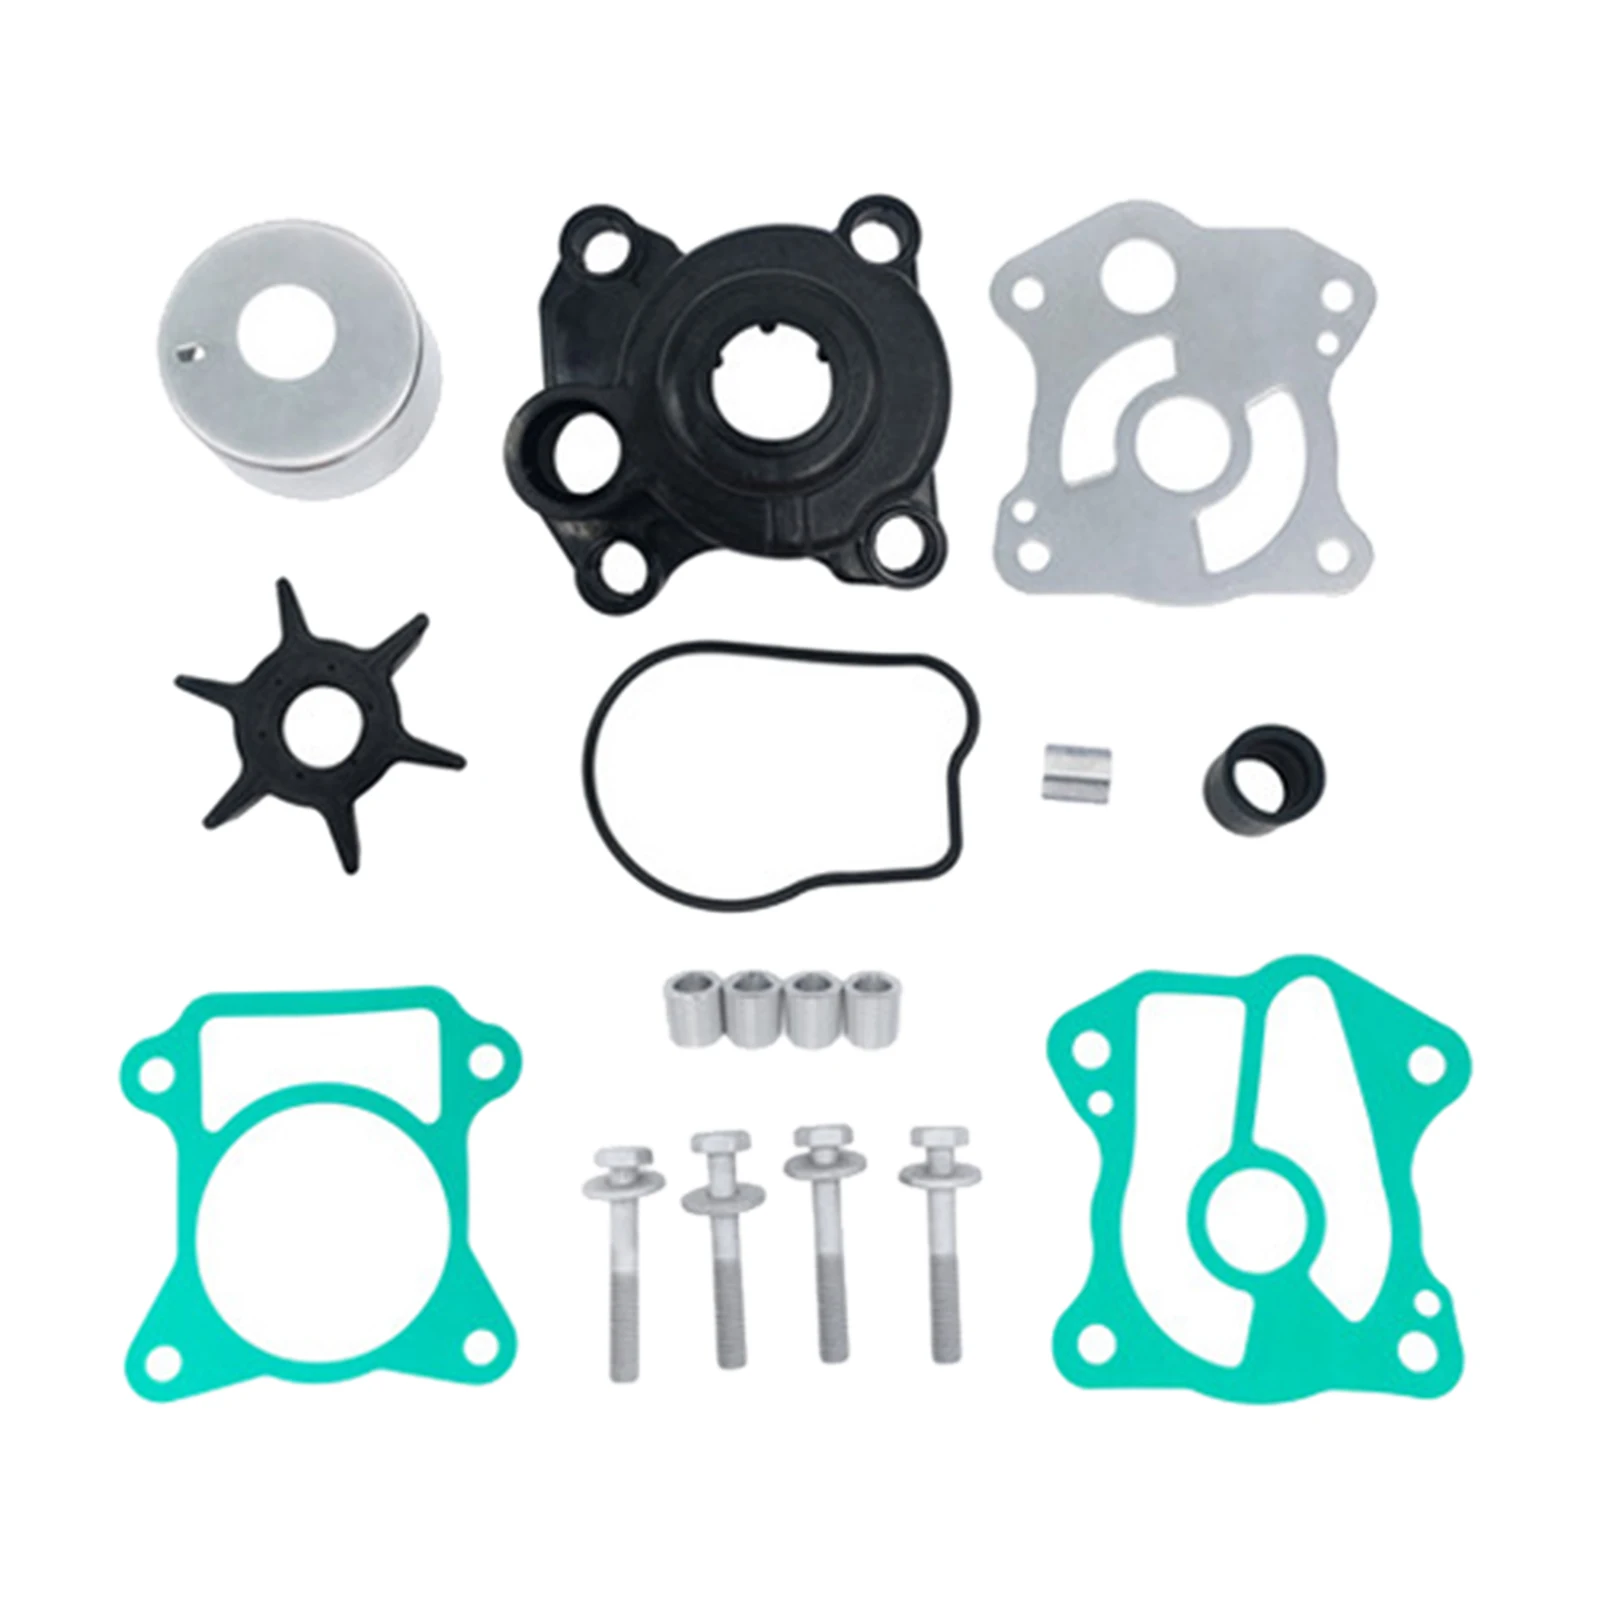 

Water Pump Impeller Kit for Honda BF50A BF50D 06193-ZV5-020 06193-ZV5-010 06193-ZV5-000 Outboard Engines